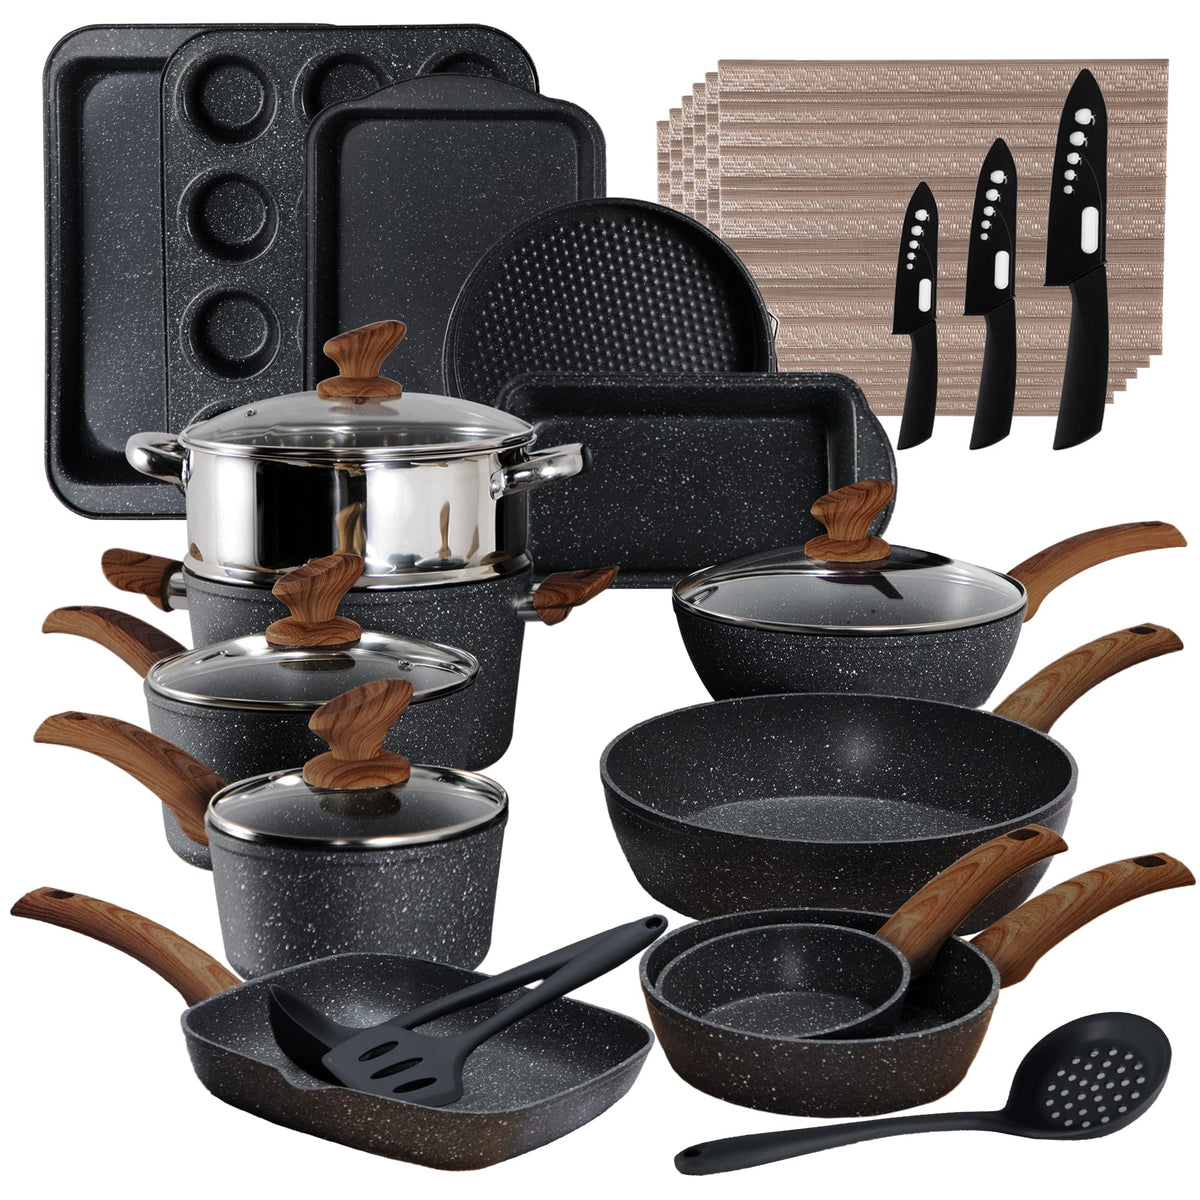  Kitchen Academy Induction Cookware Set - 17 Piece Gray Cooking Pan  Set, Granite Non-Stick Pots and Pans Set: Home & Kitchen